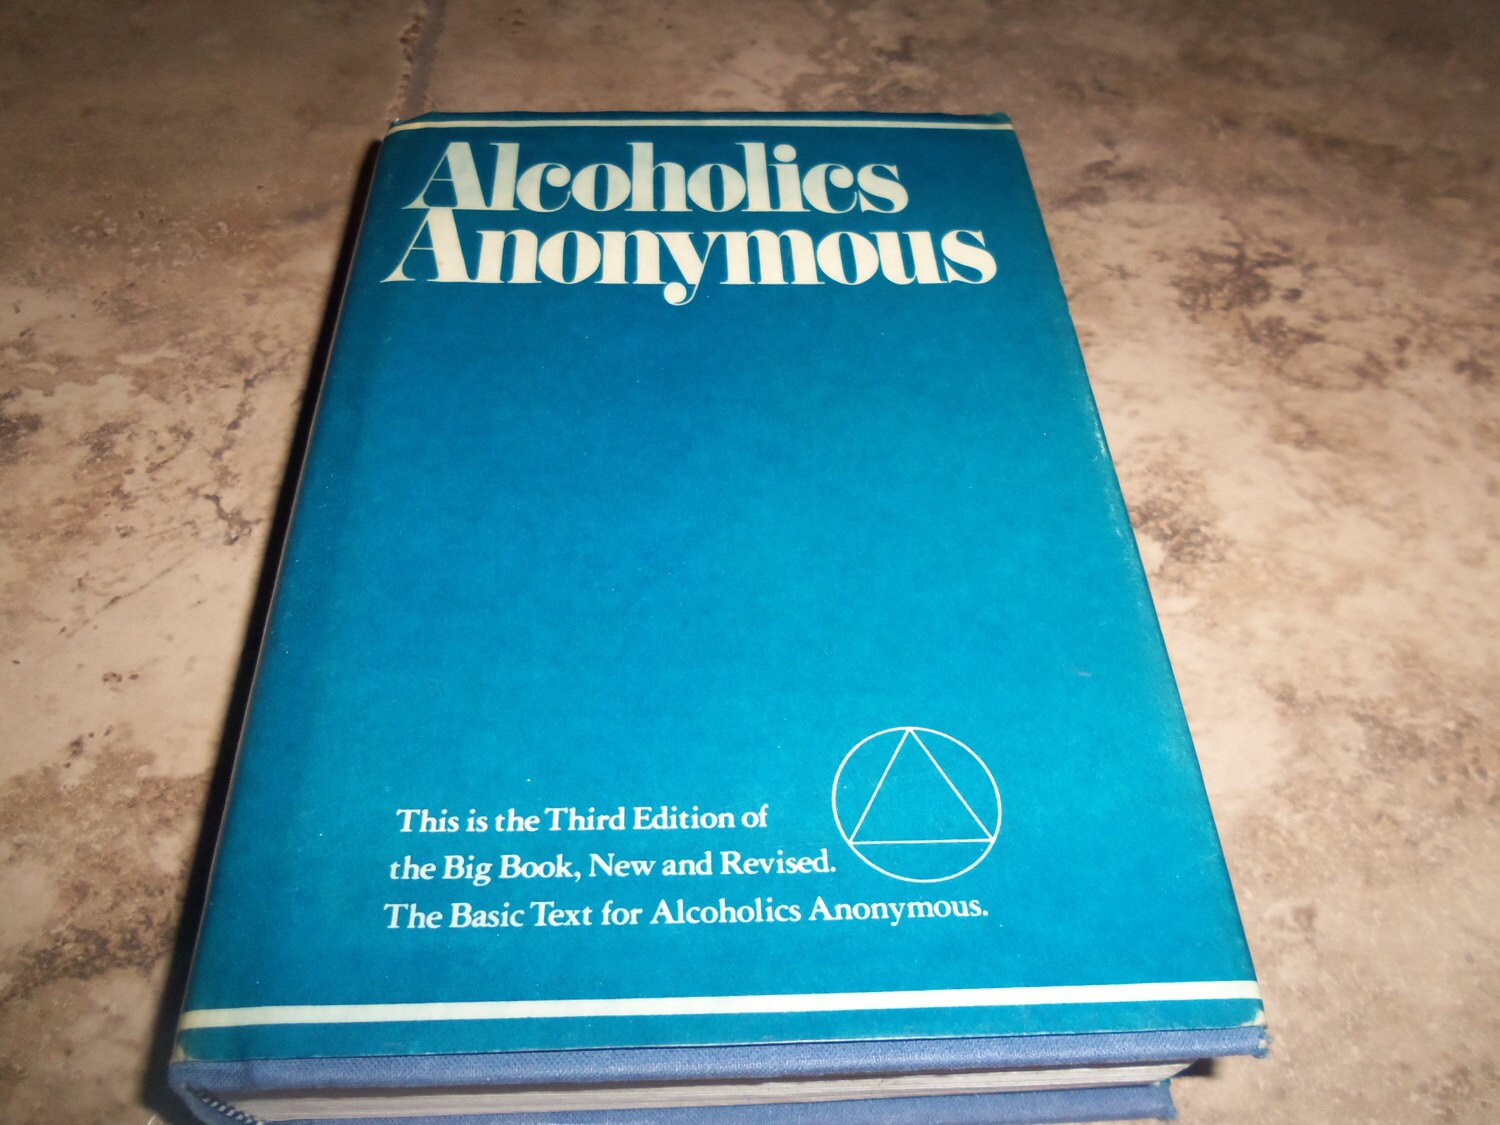 80 List Alcoholics Anonymous Big Book 4Th Edition Hardcover from Famous authors